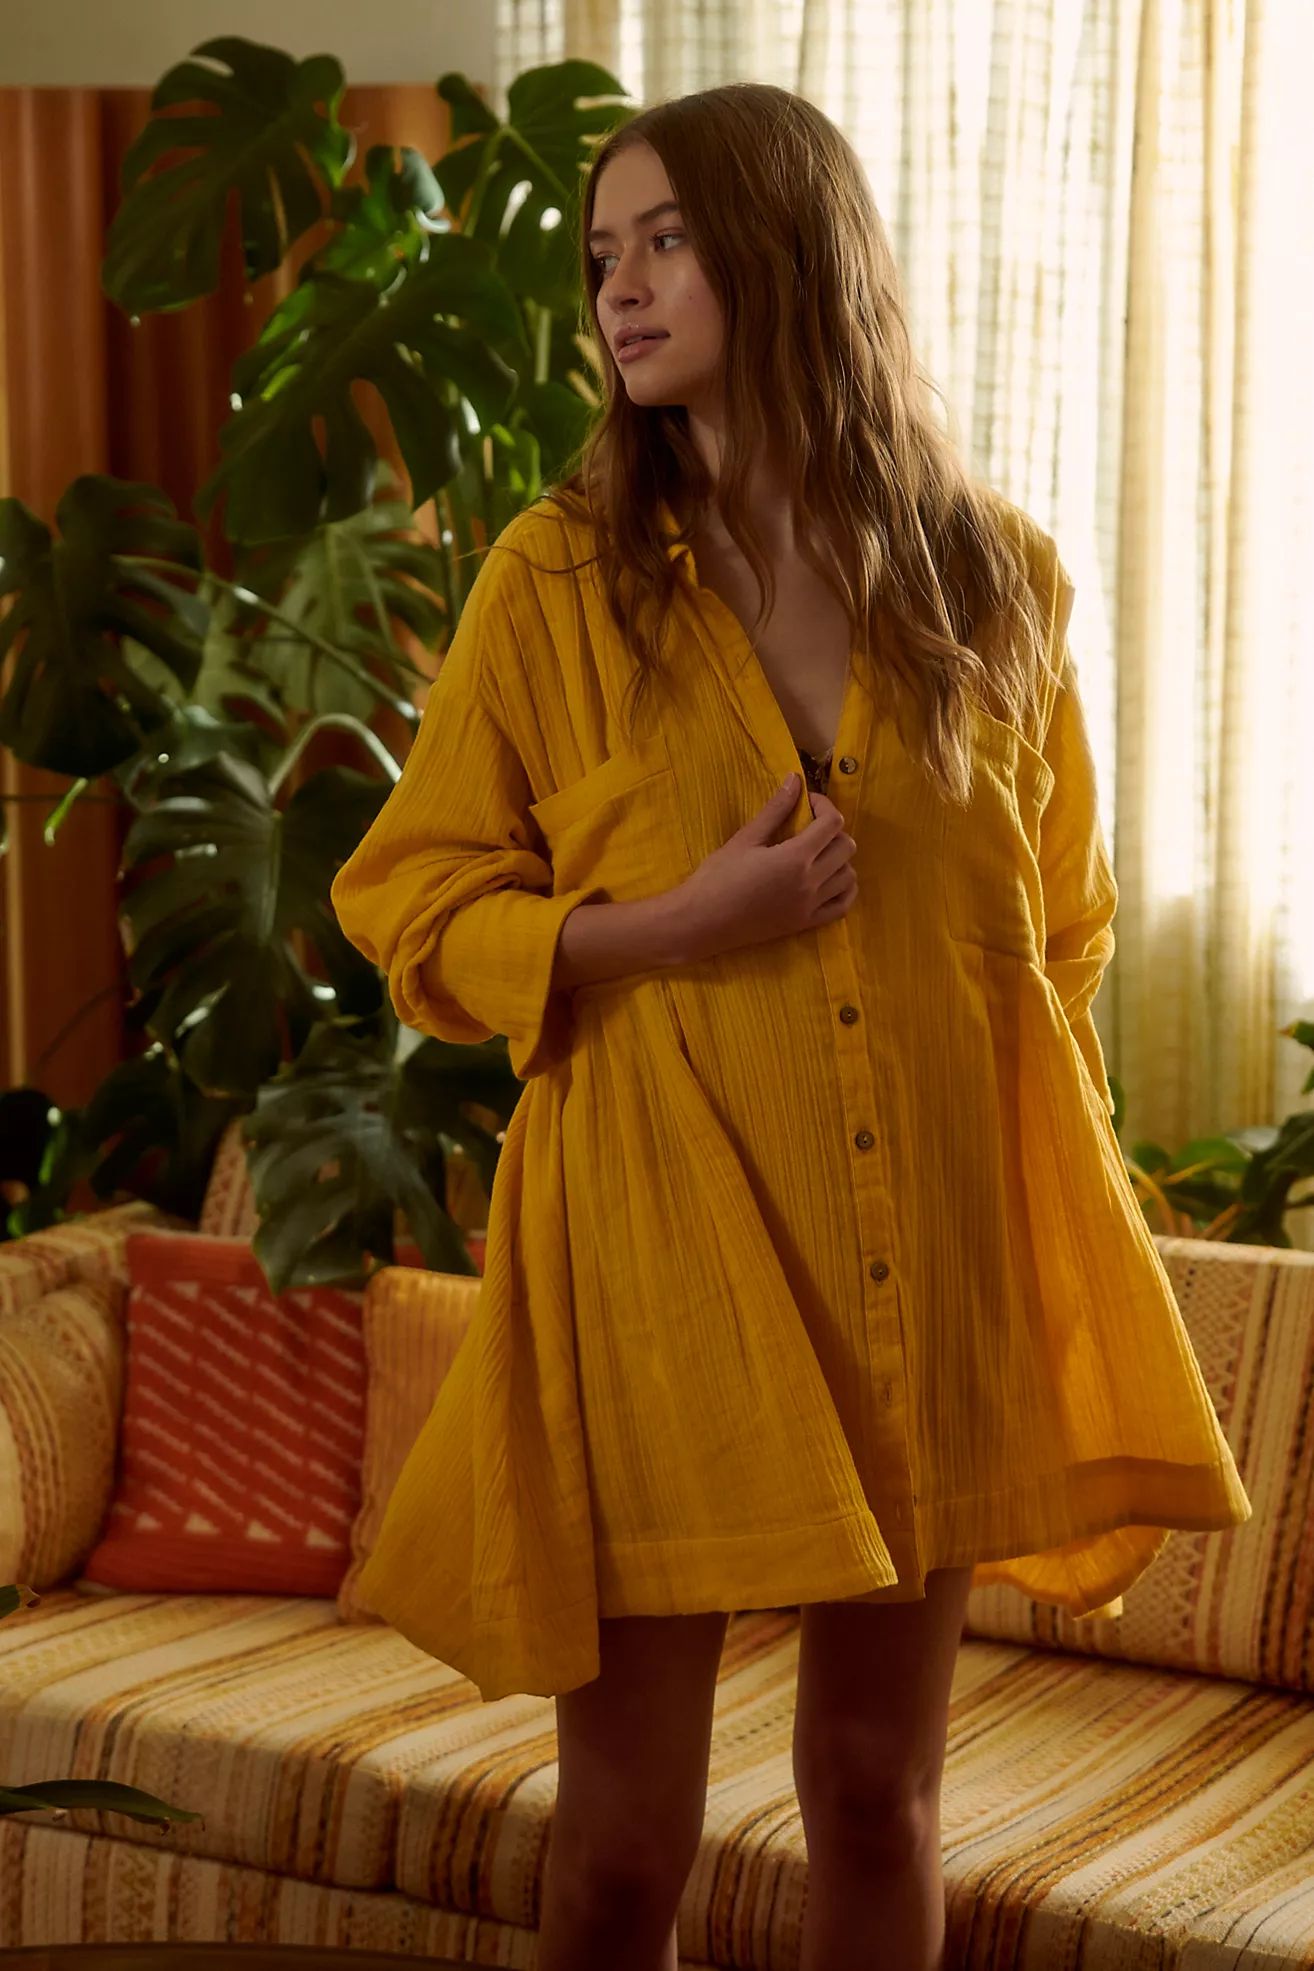 The Voyager Shirtdress | Free People (Global - UK&FR Excluded)